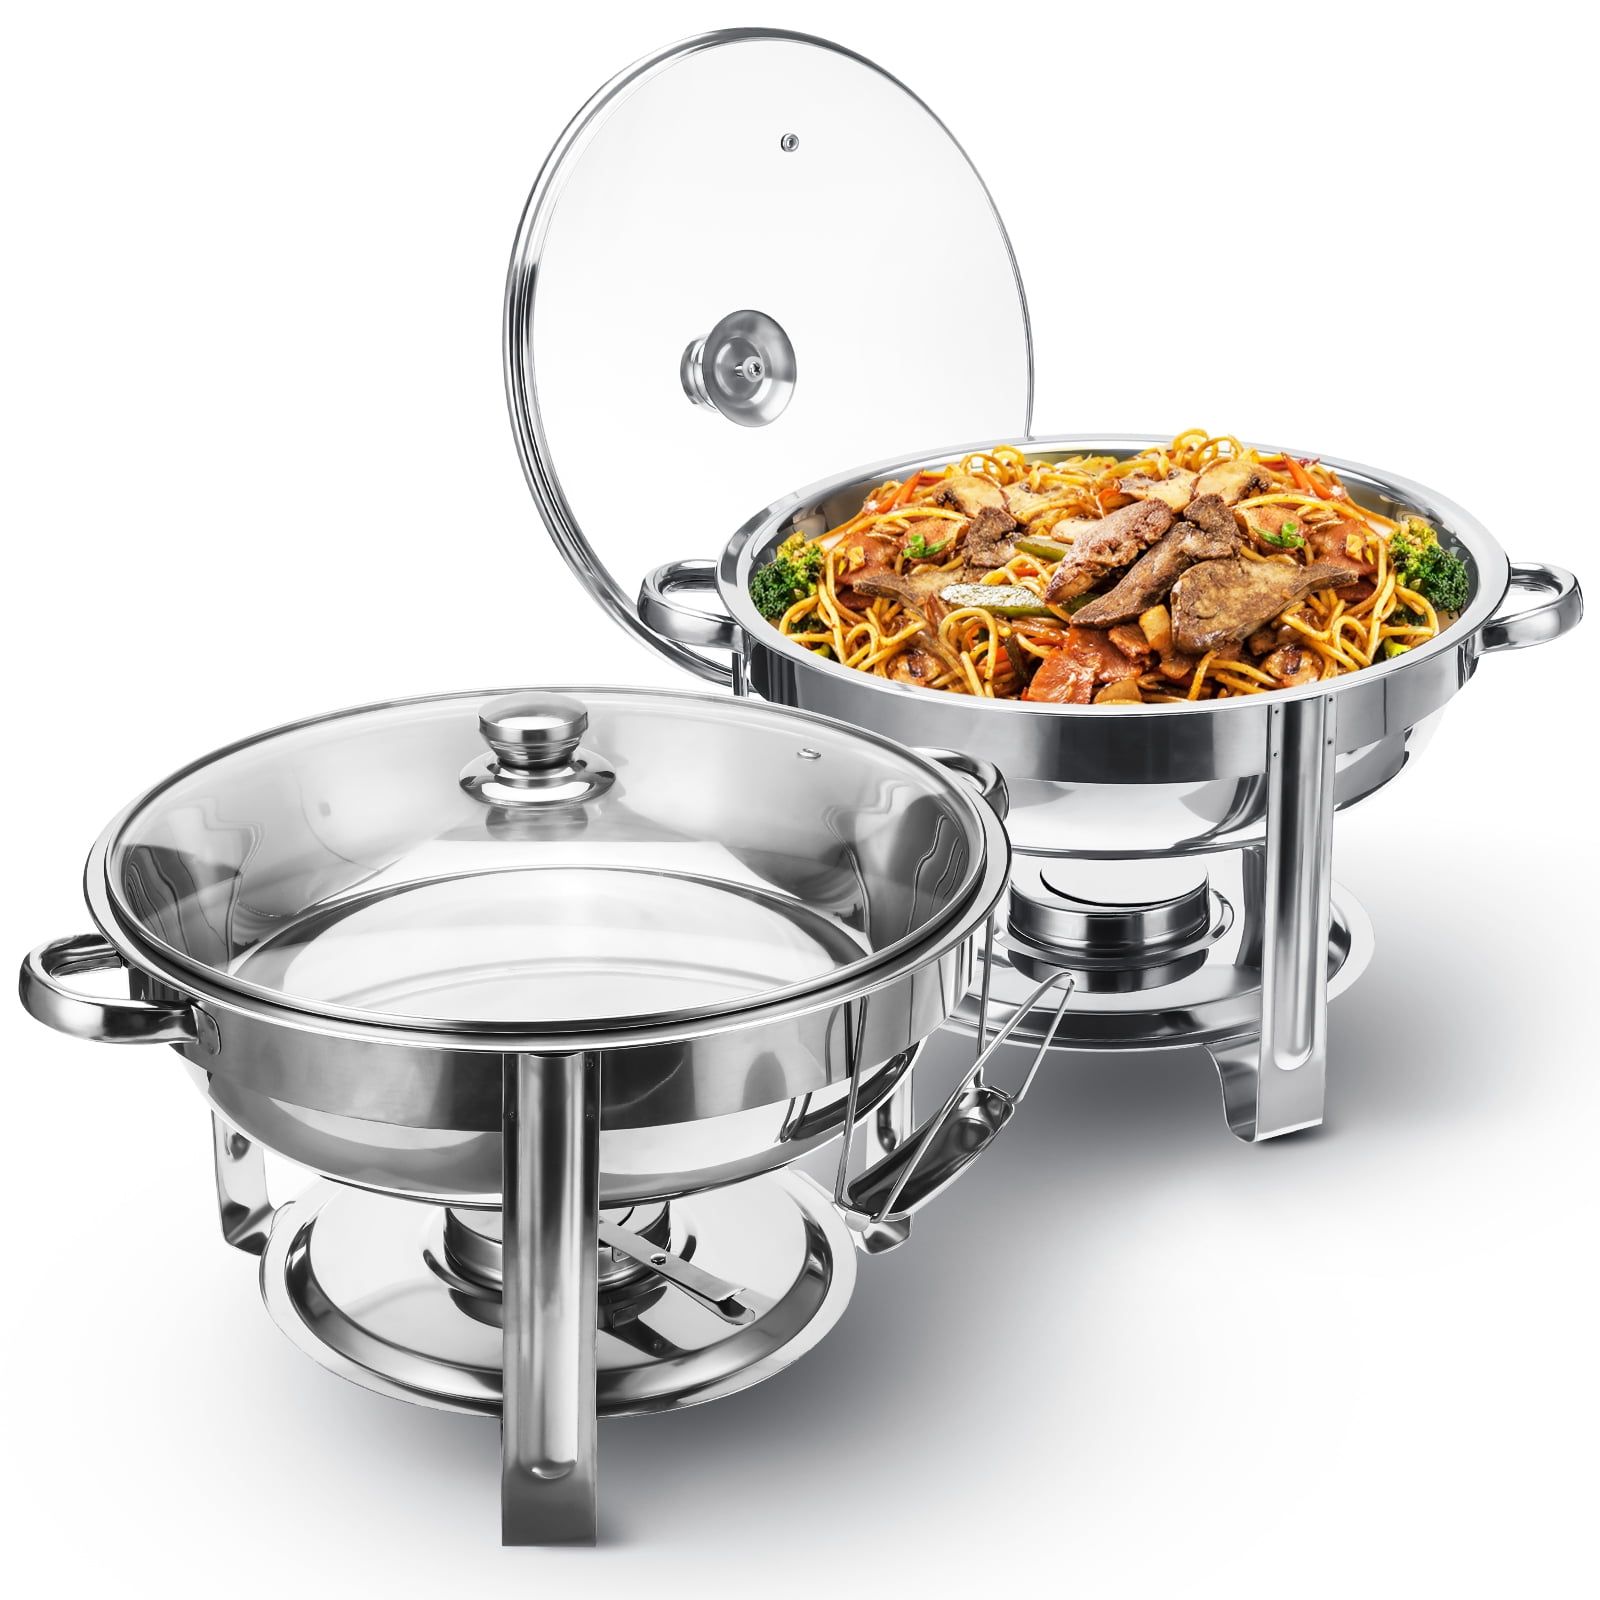 3 PACK DEAL FOLDING CHAFING Dish Sets CHAFER WARMER CATERING 8 QT $10 Rebate 